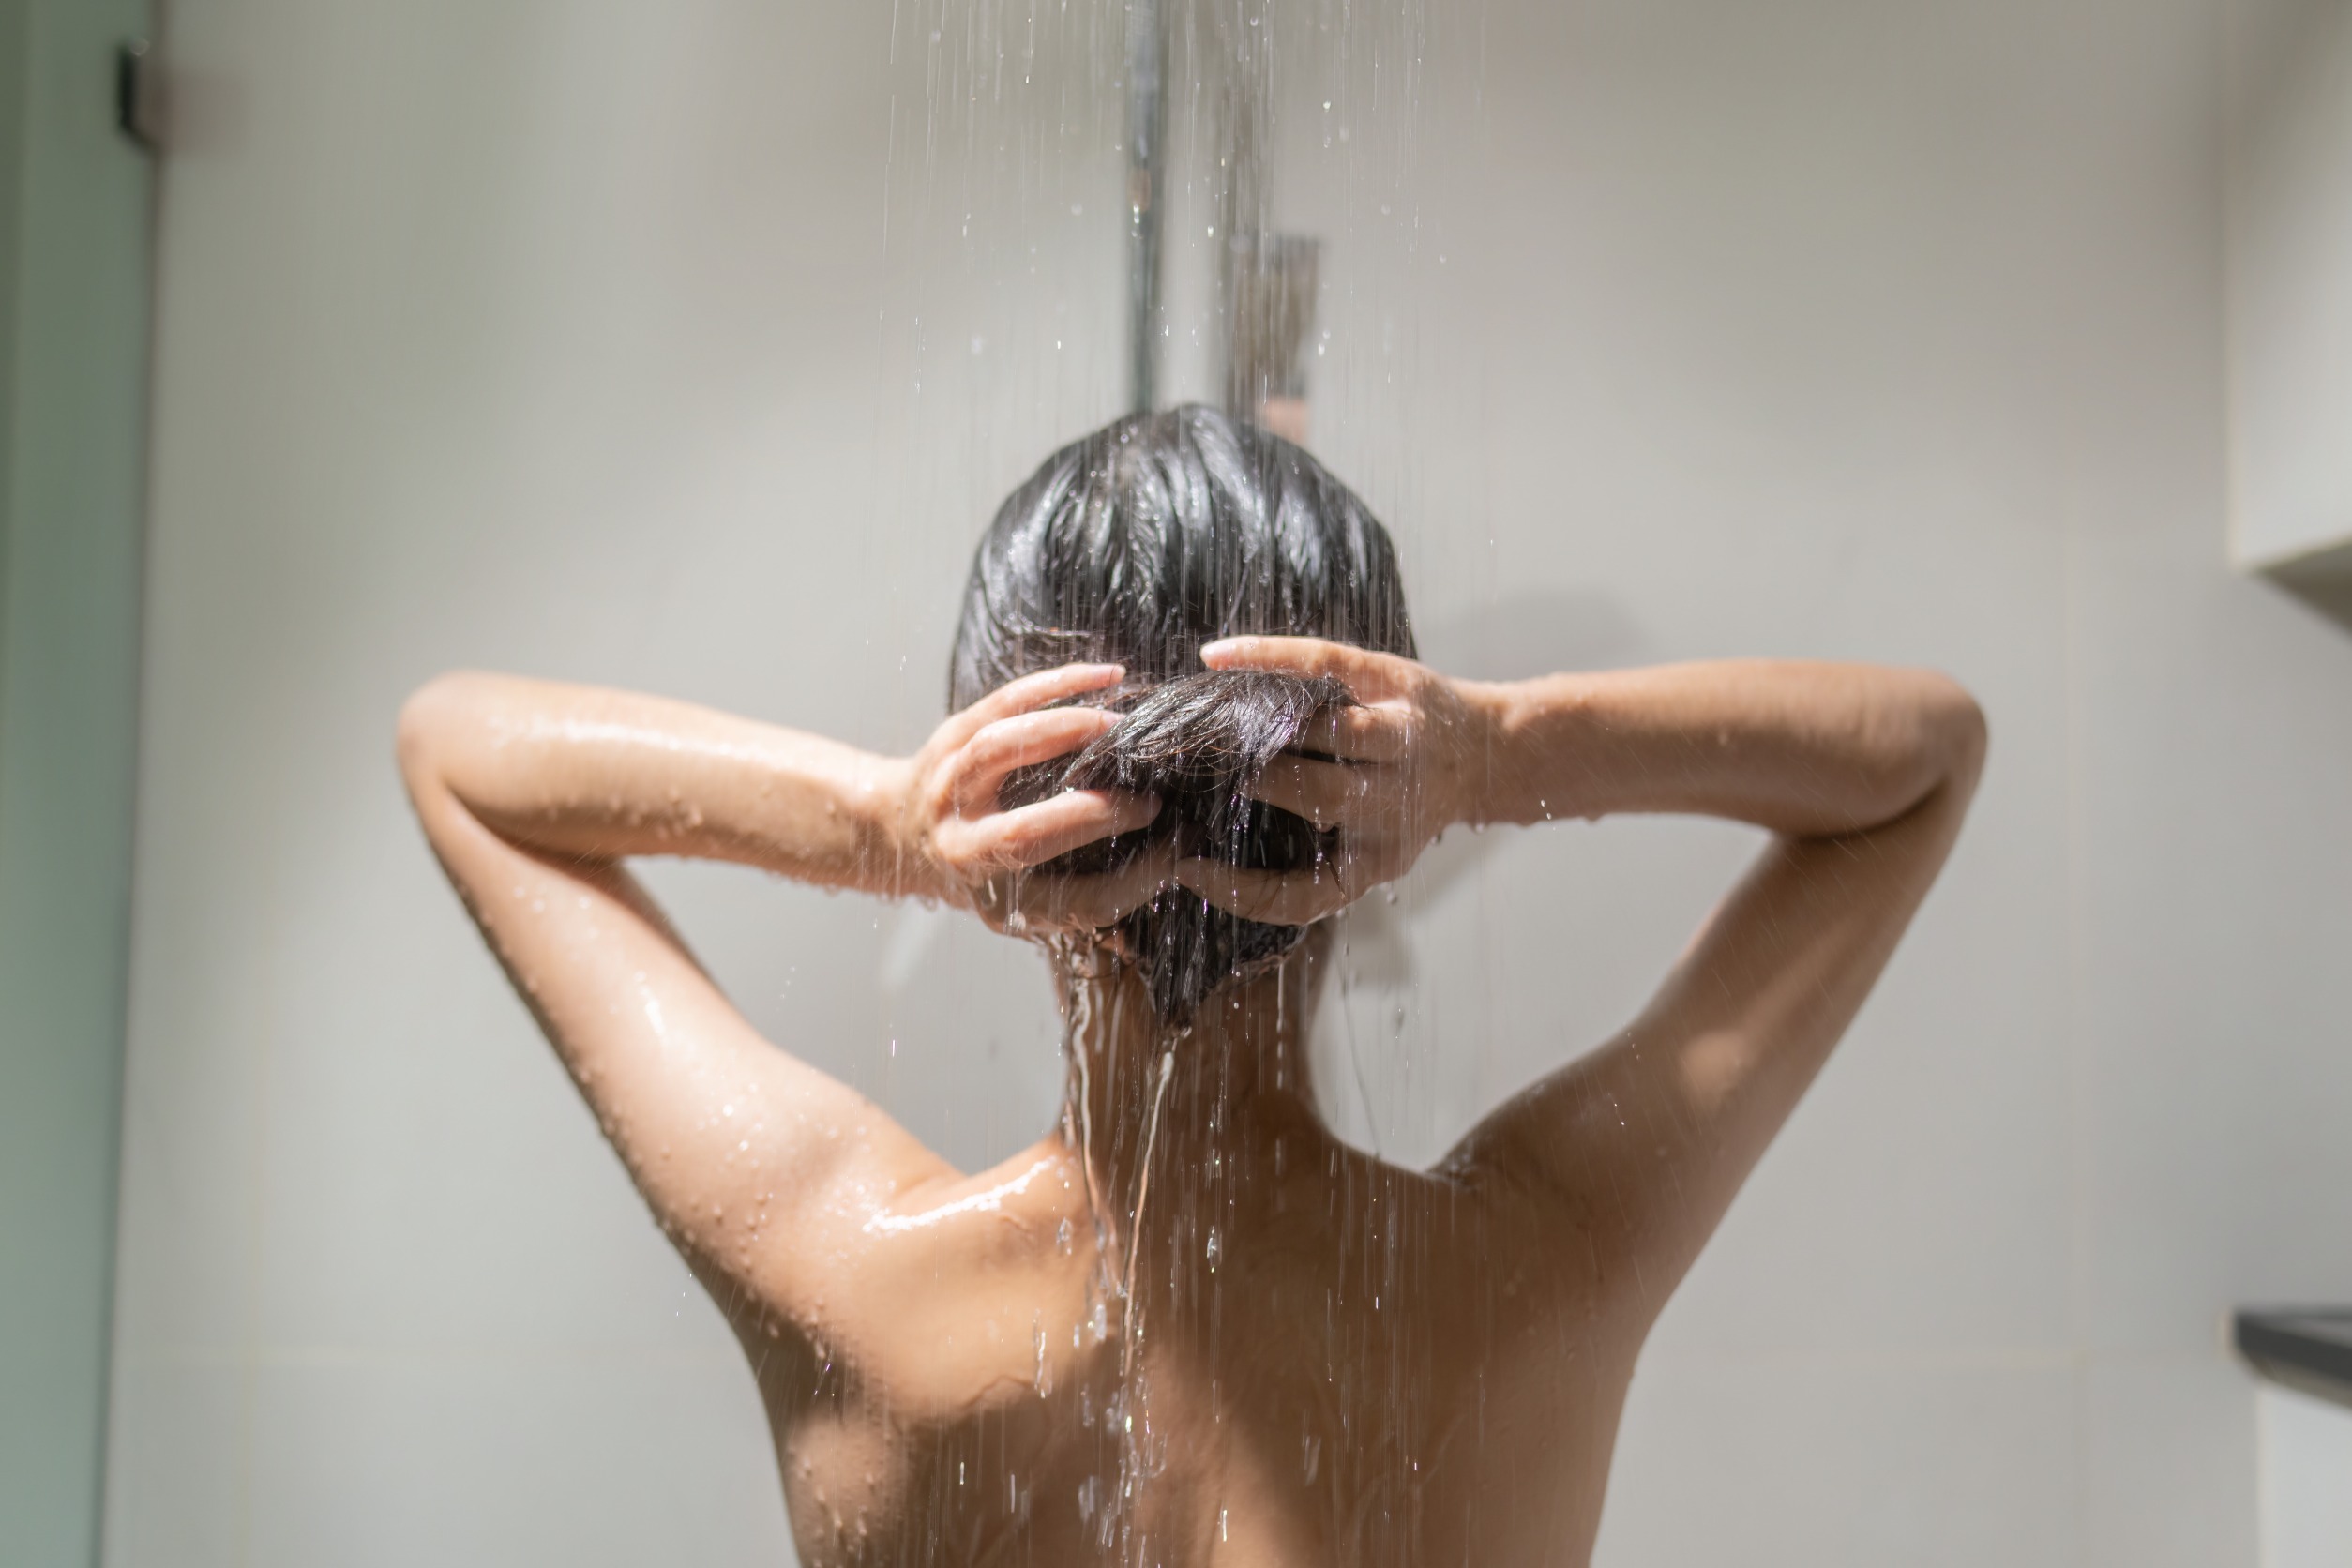 How to take an 'Everything Shower' - Gen Z's new trend